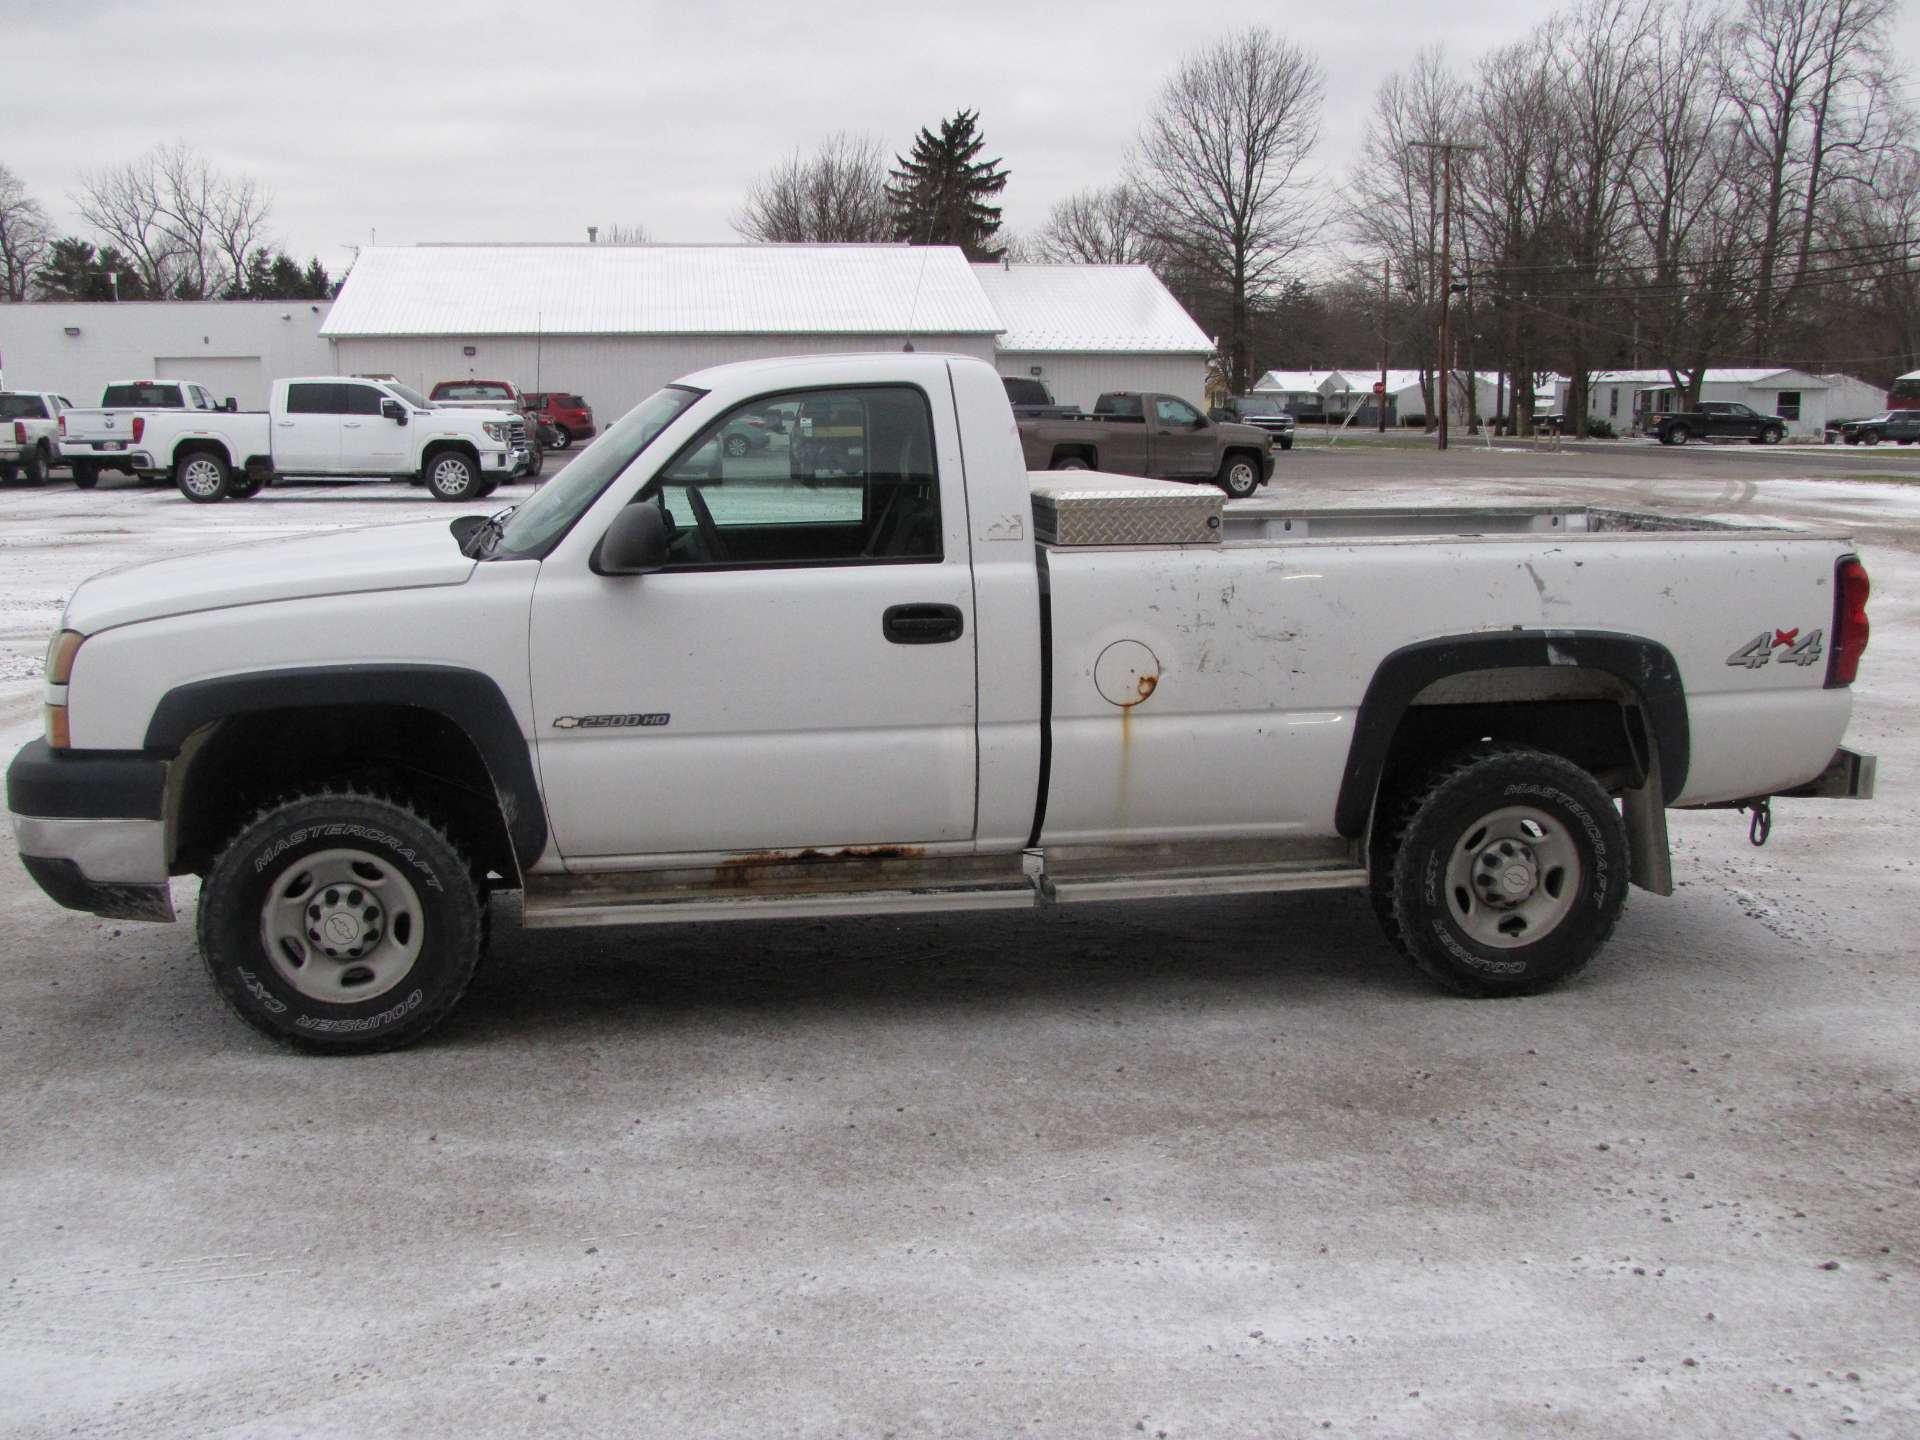 2006 Chevy 2500 HD pickup truck - Image 13 of 63